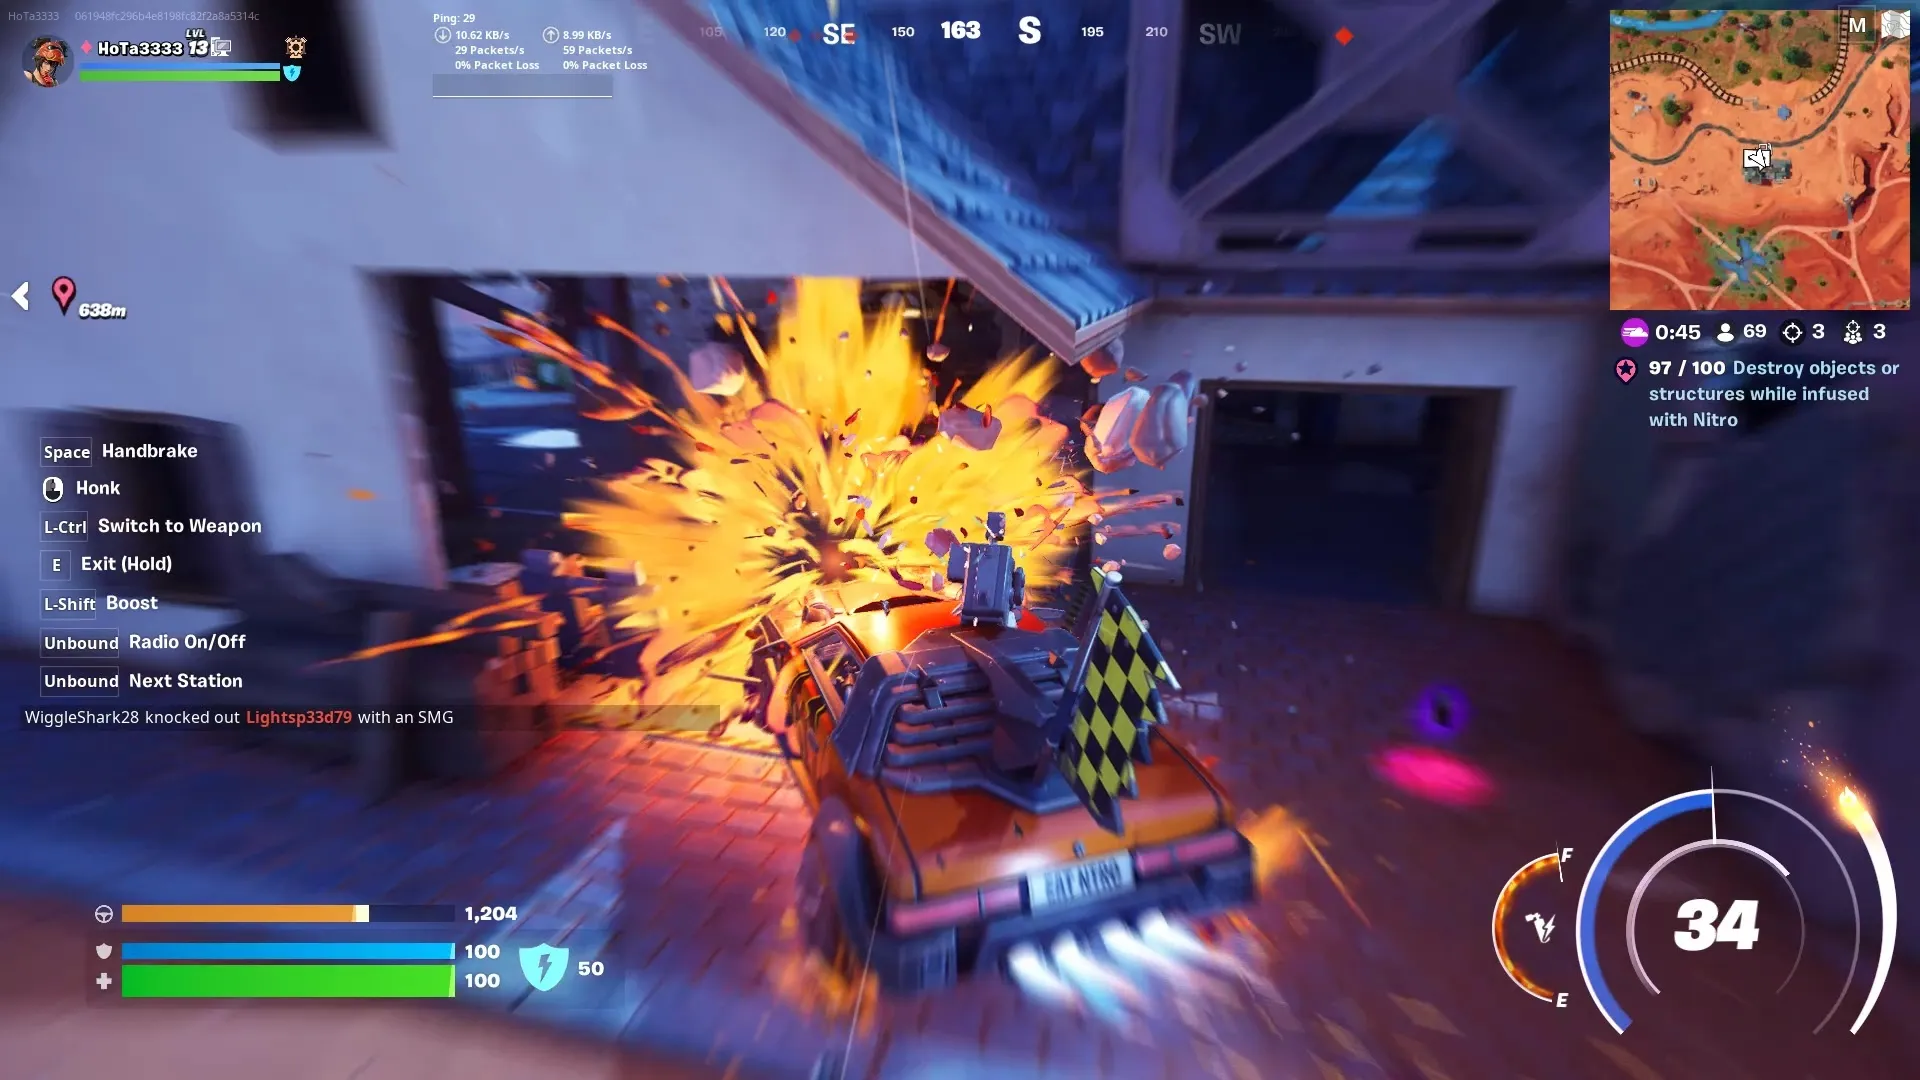 How to Destroy Objects or Structures While Infused with Nitro Fortnite